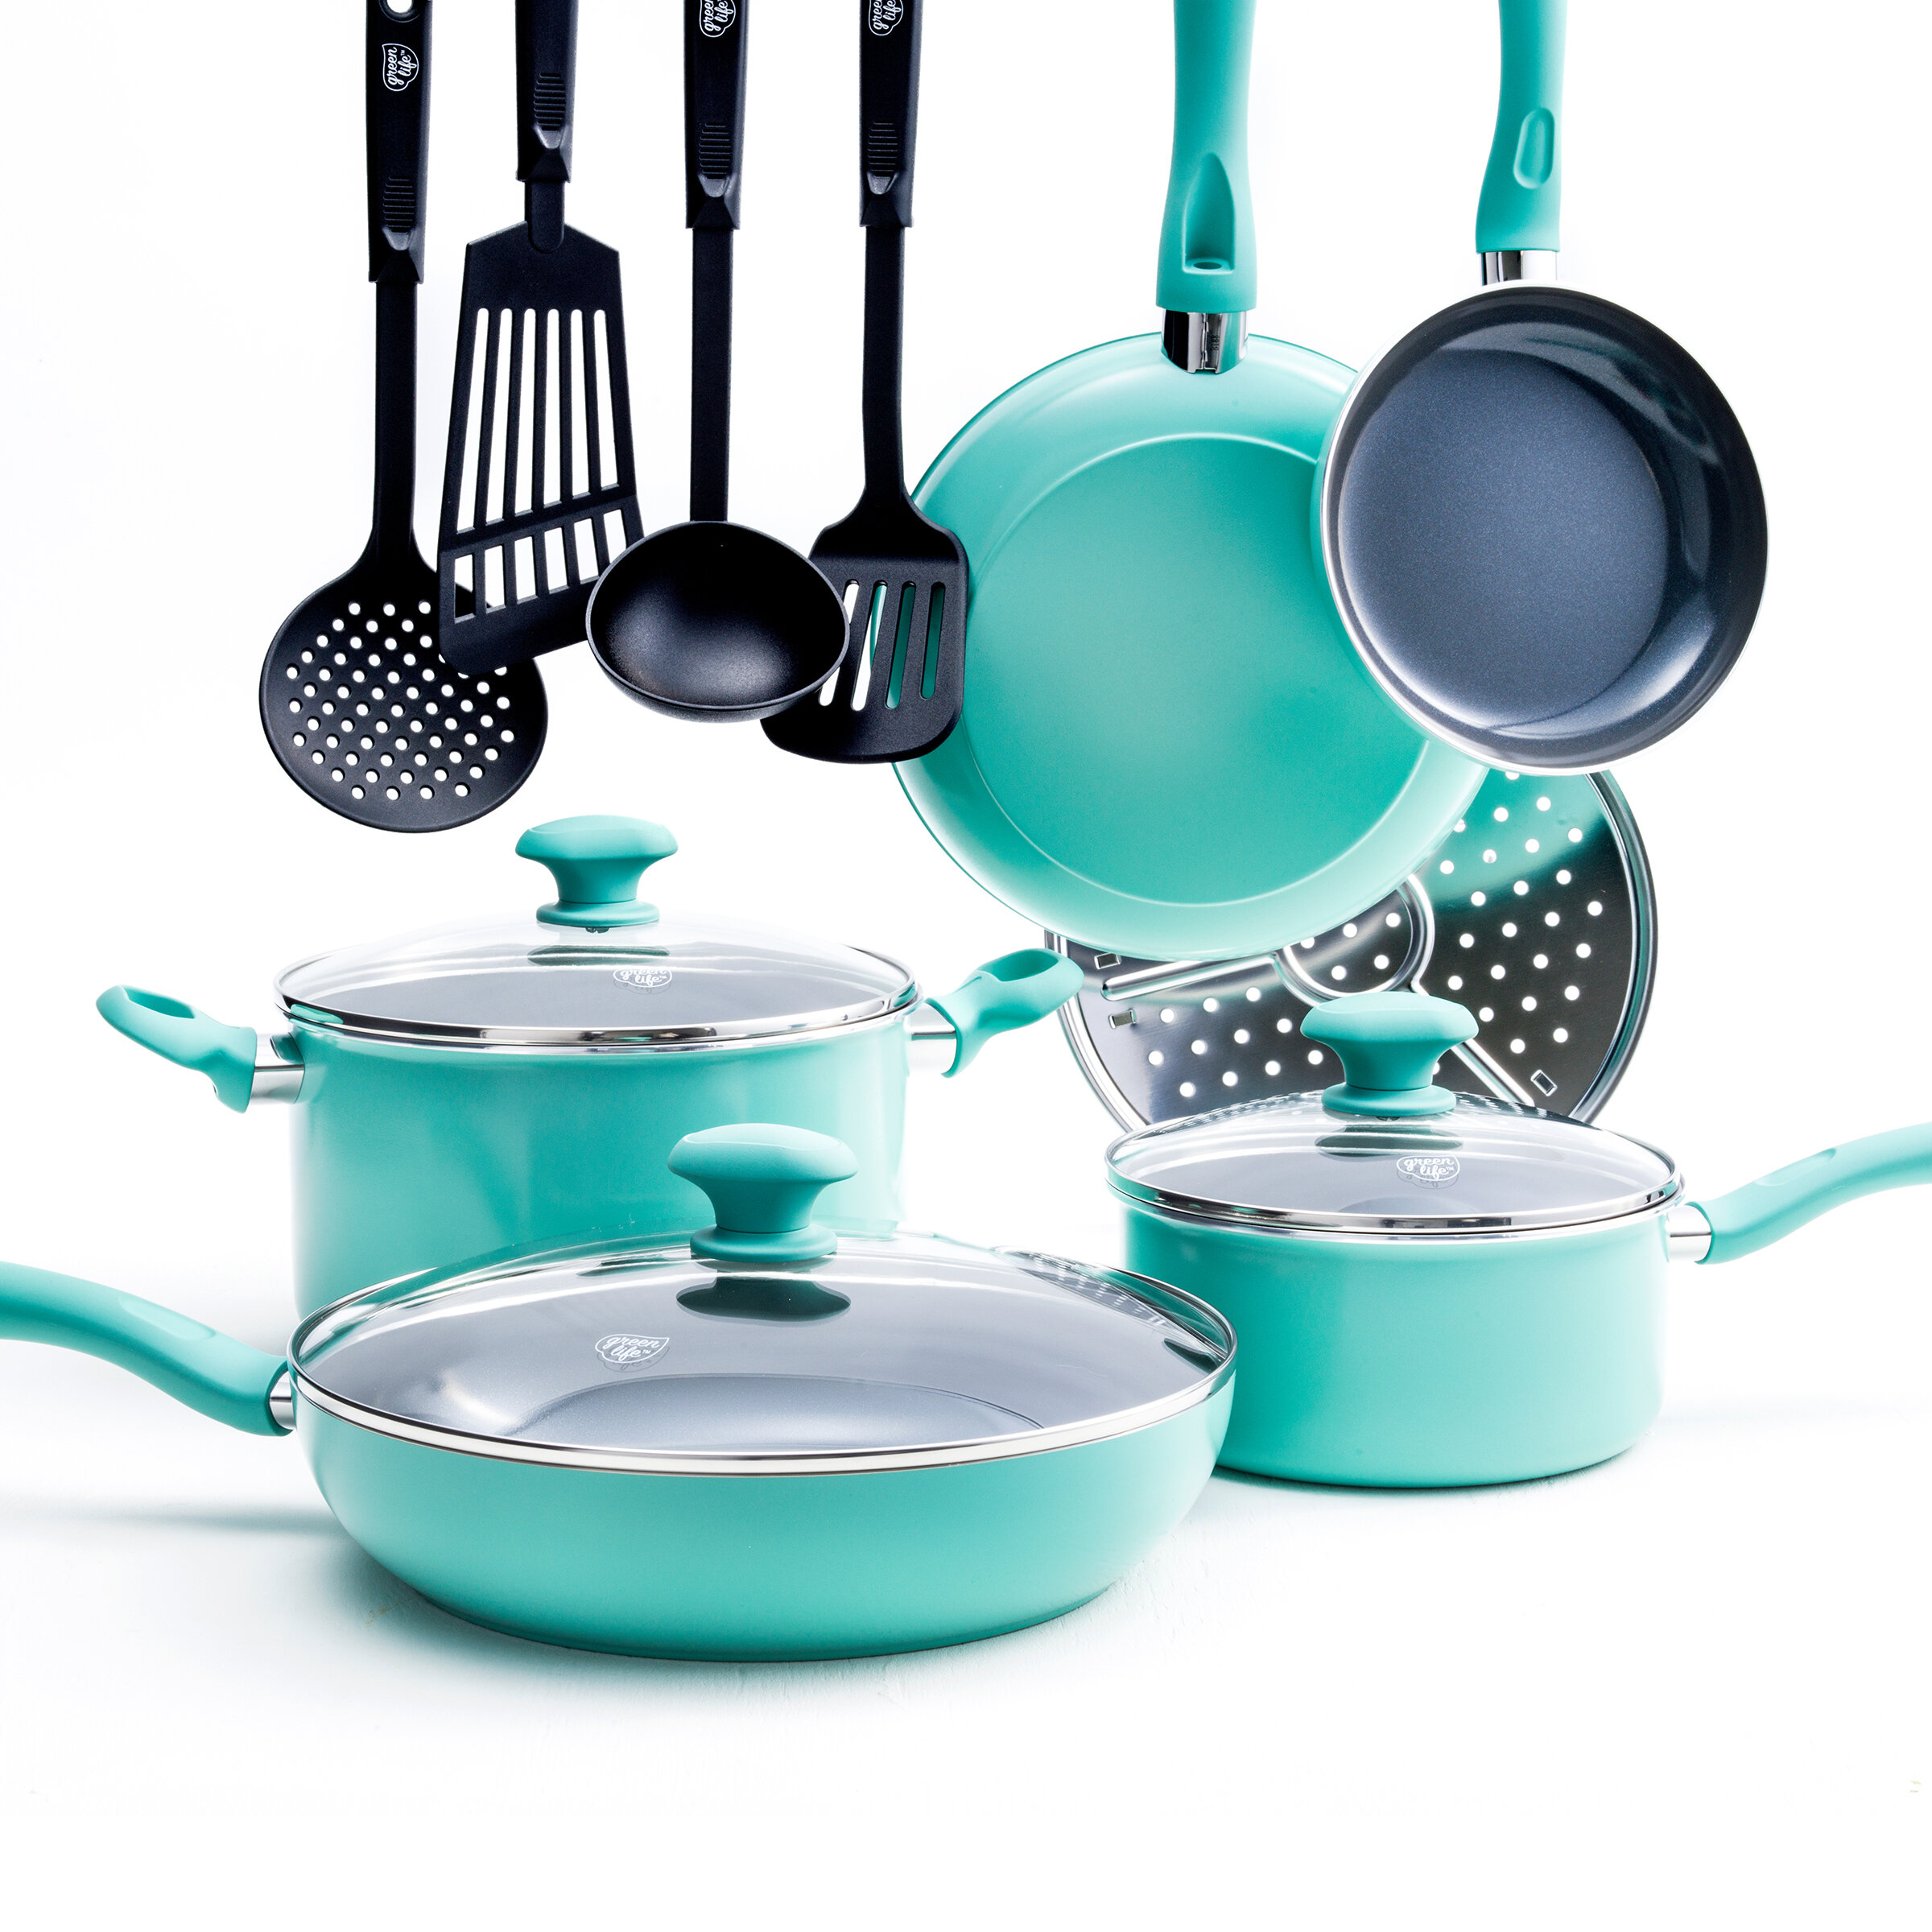 Greenlife Cookware Review: The Ultimate Non-Stick Kitchen Upgrade.